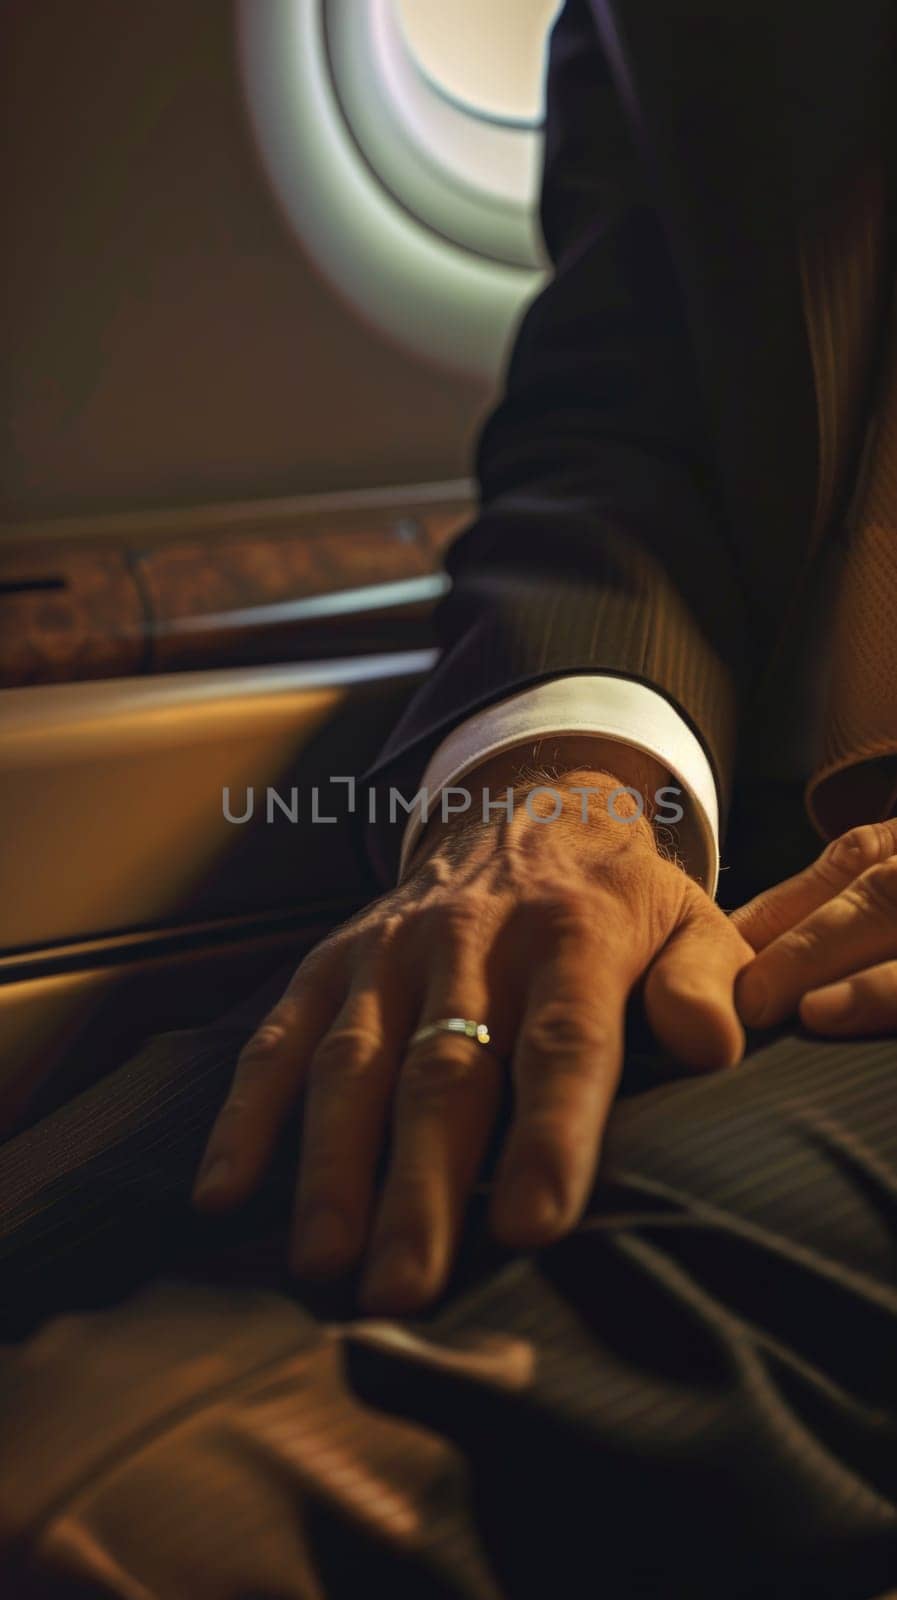 A male businessman dressed in a suit and tie seated on an airplane.